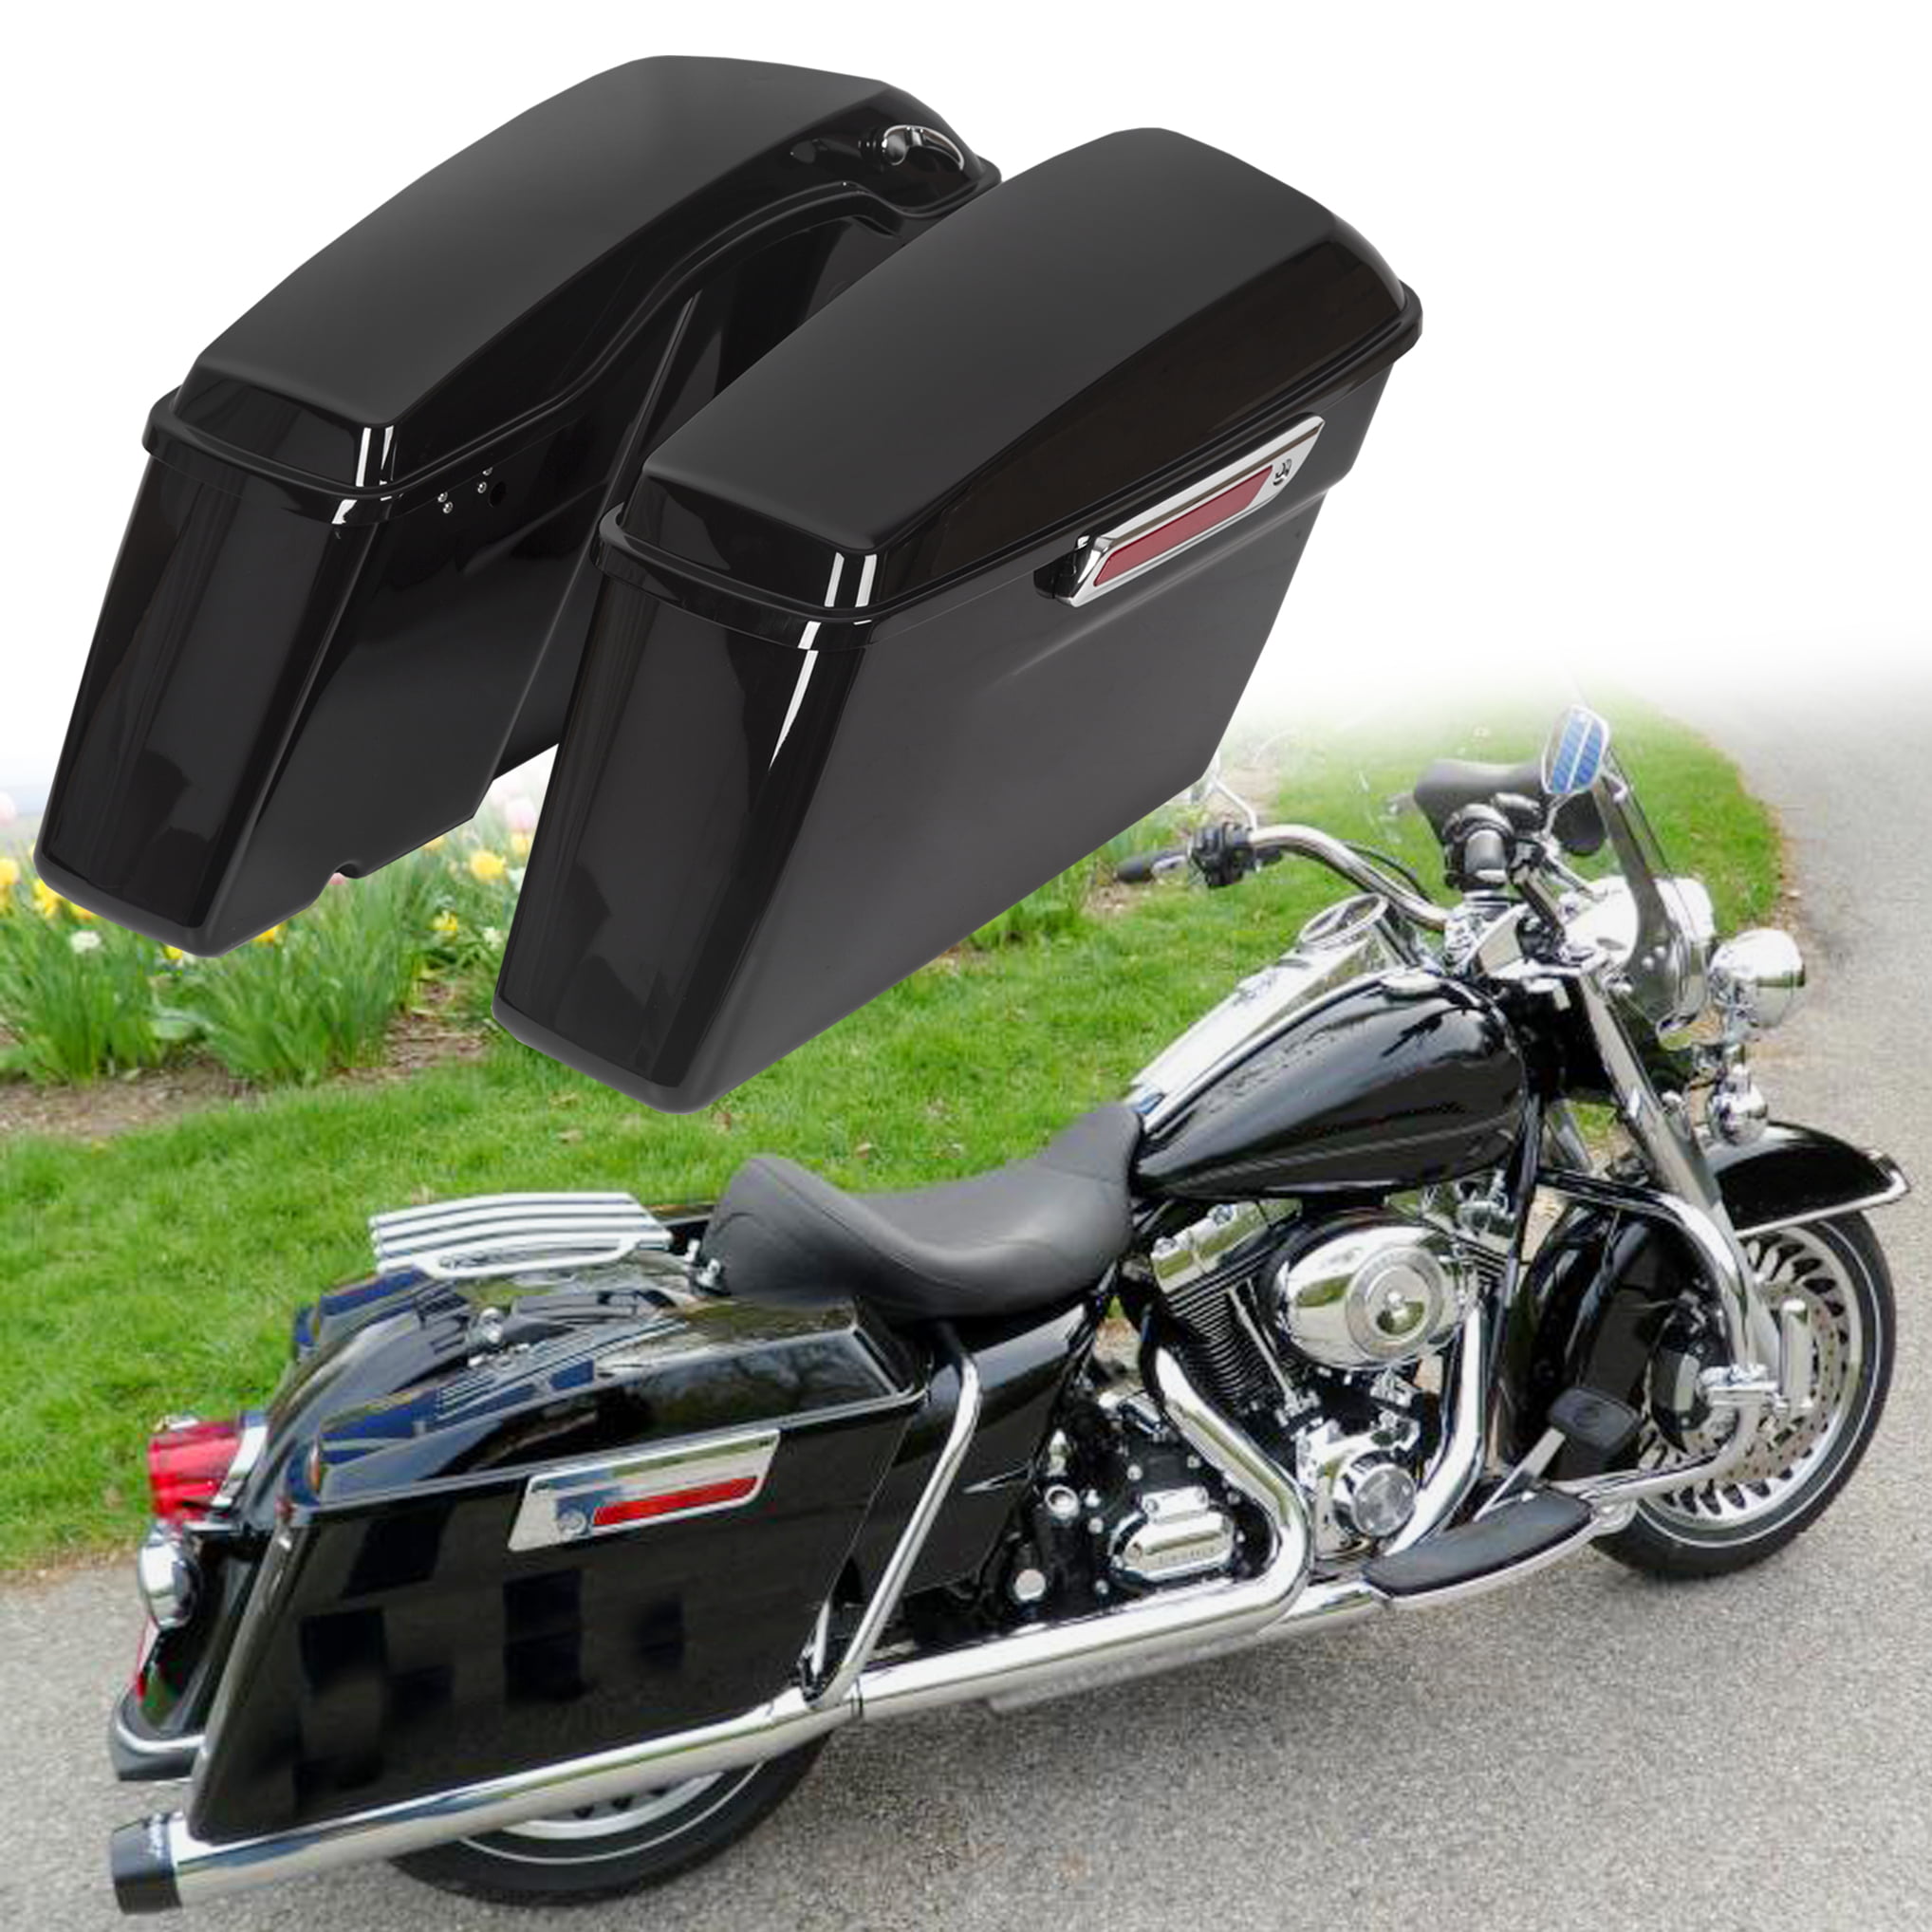 5" Stretched Extended Hard Saddle bags For Harley Touring Street Glide 2014-2019 